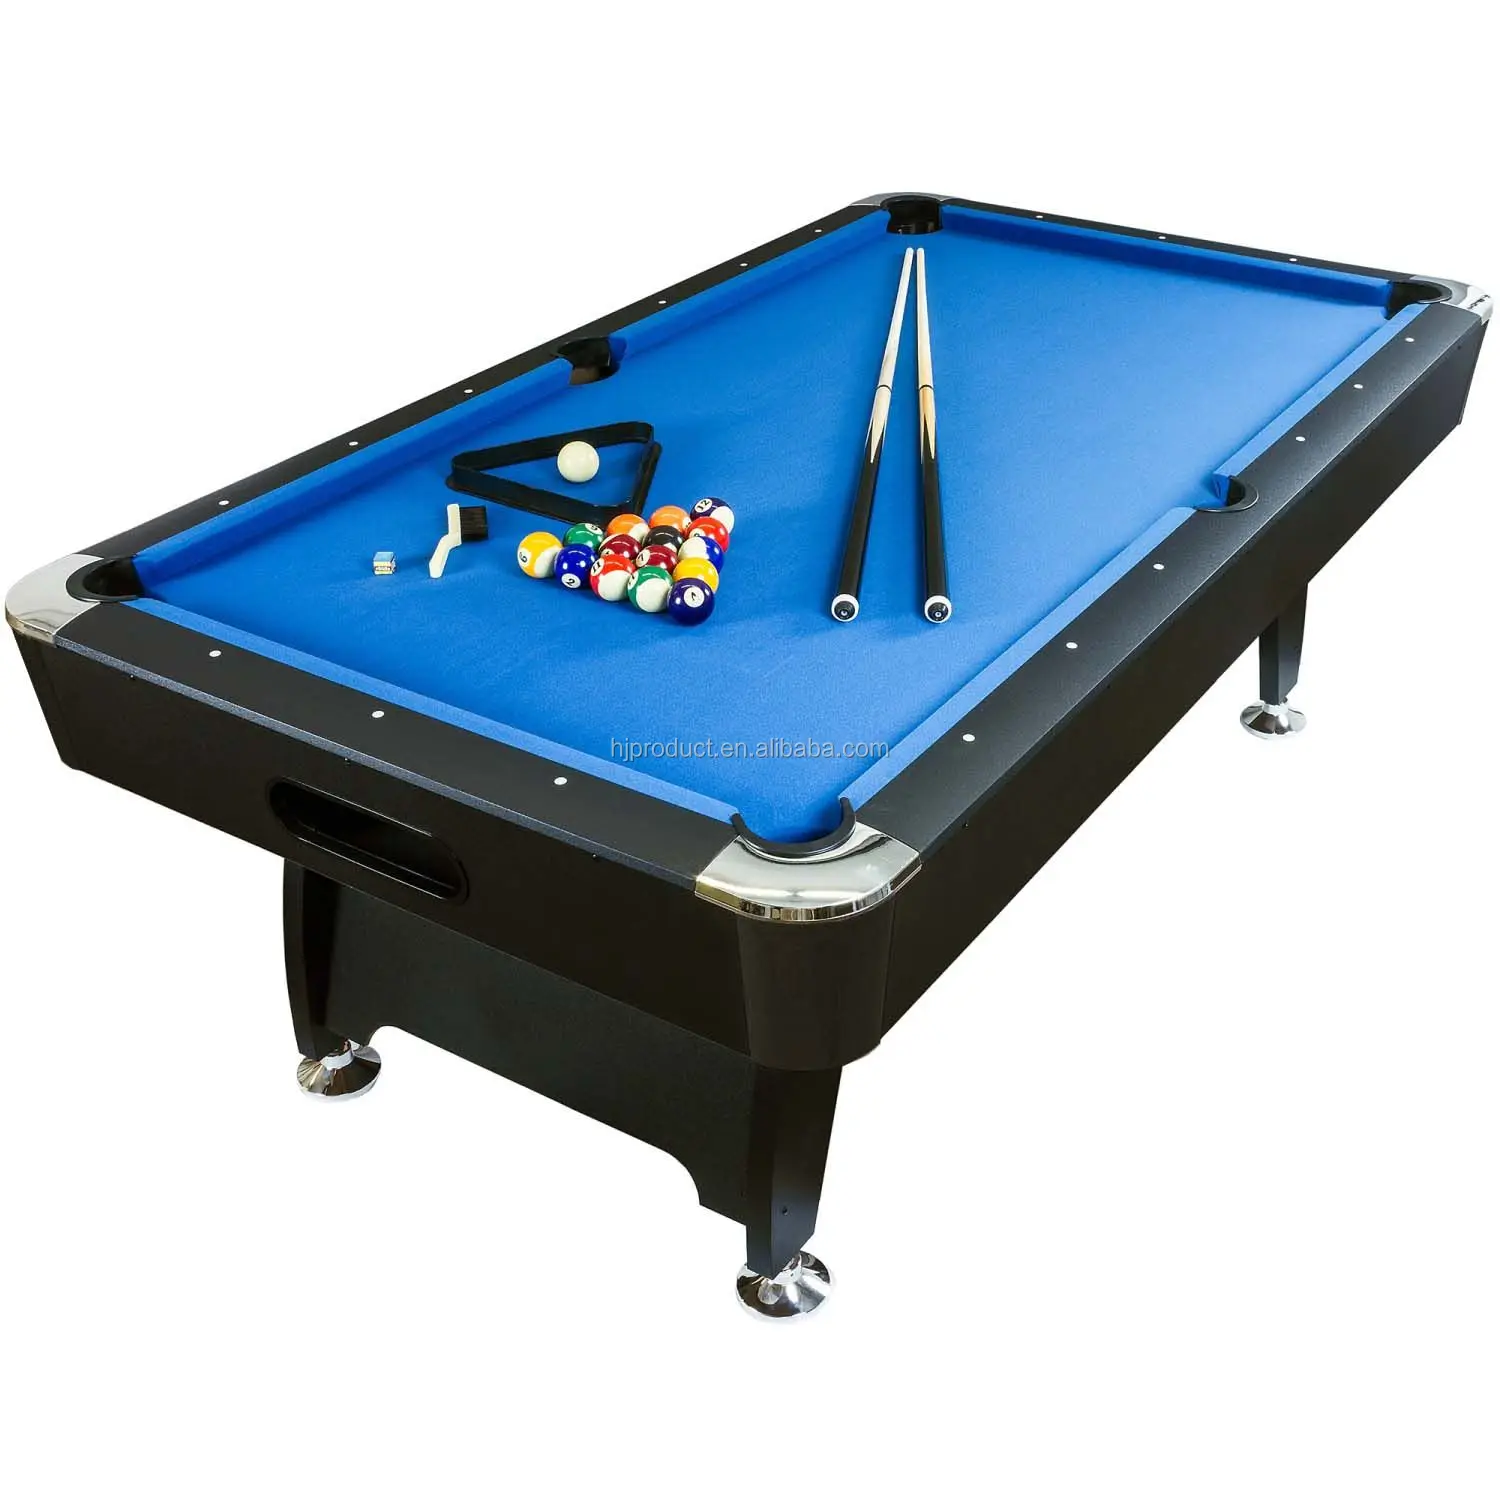 GREEN PVC Pool Snooker Billiard Table Cover for 7' ft foot Pub Size pool table 